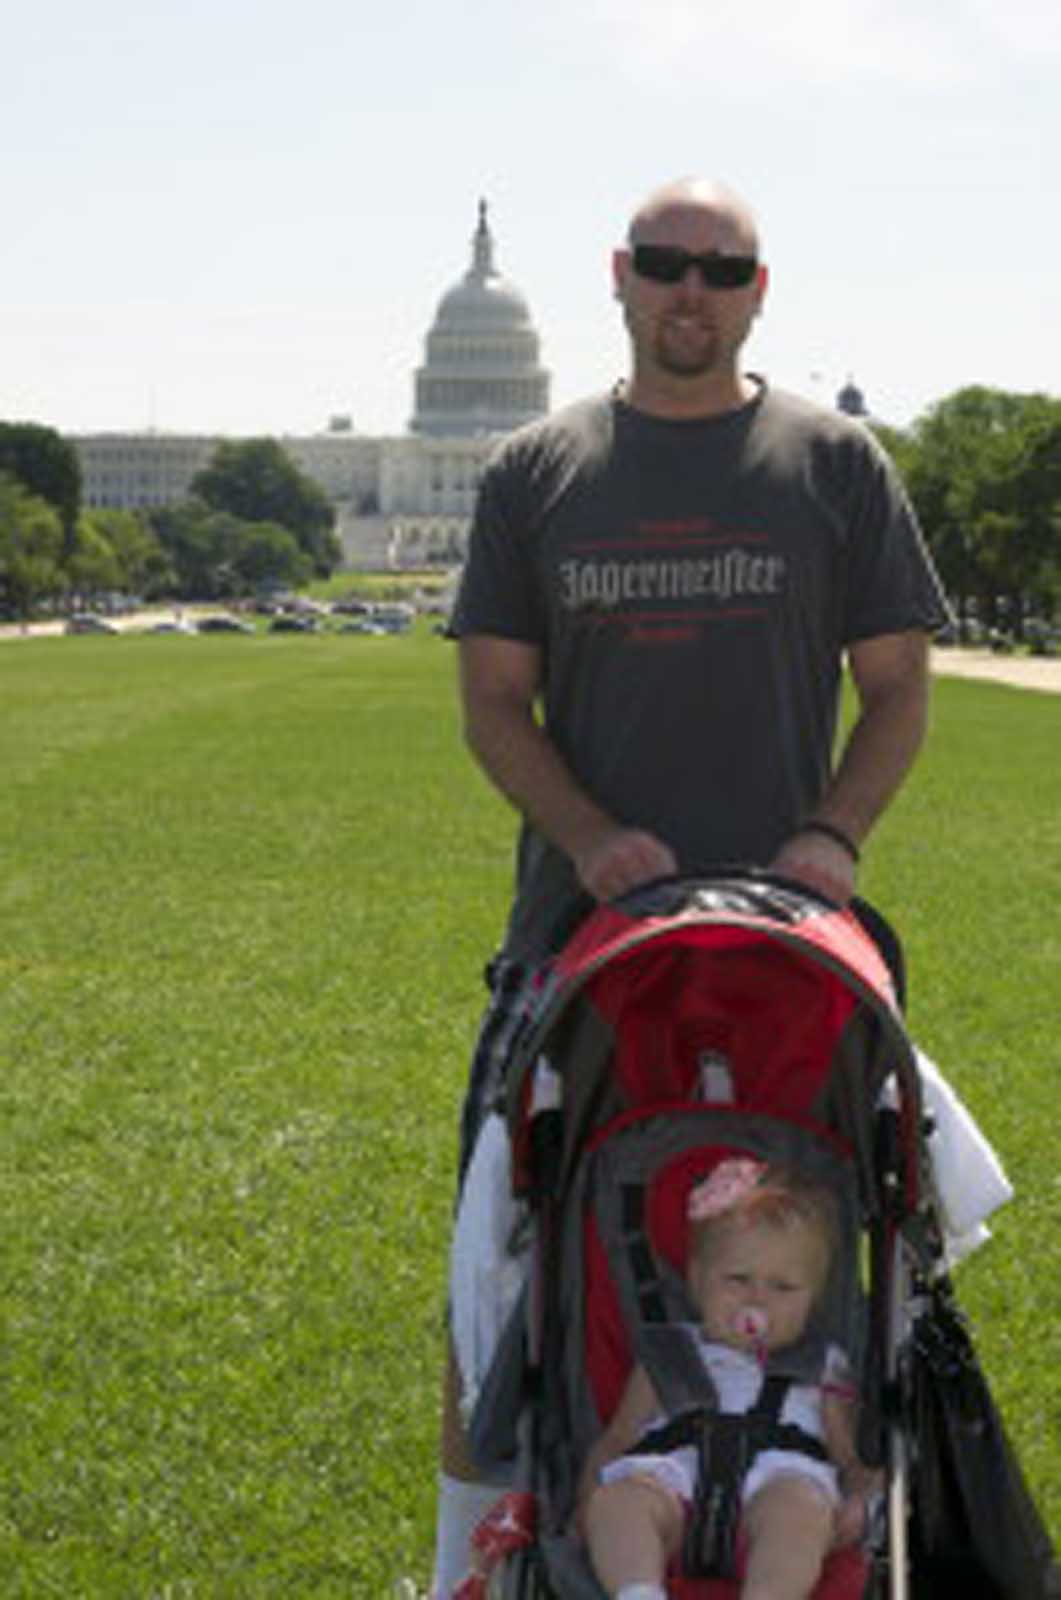 We walked back and forth in front of the capital so often this trip. DC is a great walking city!